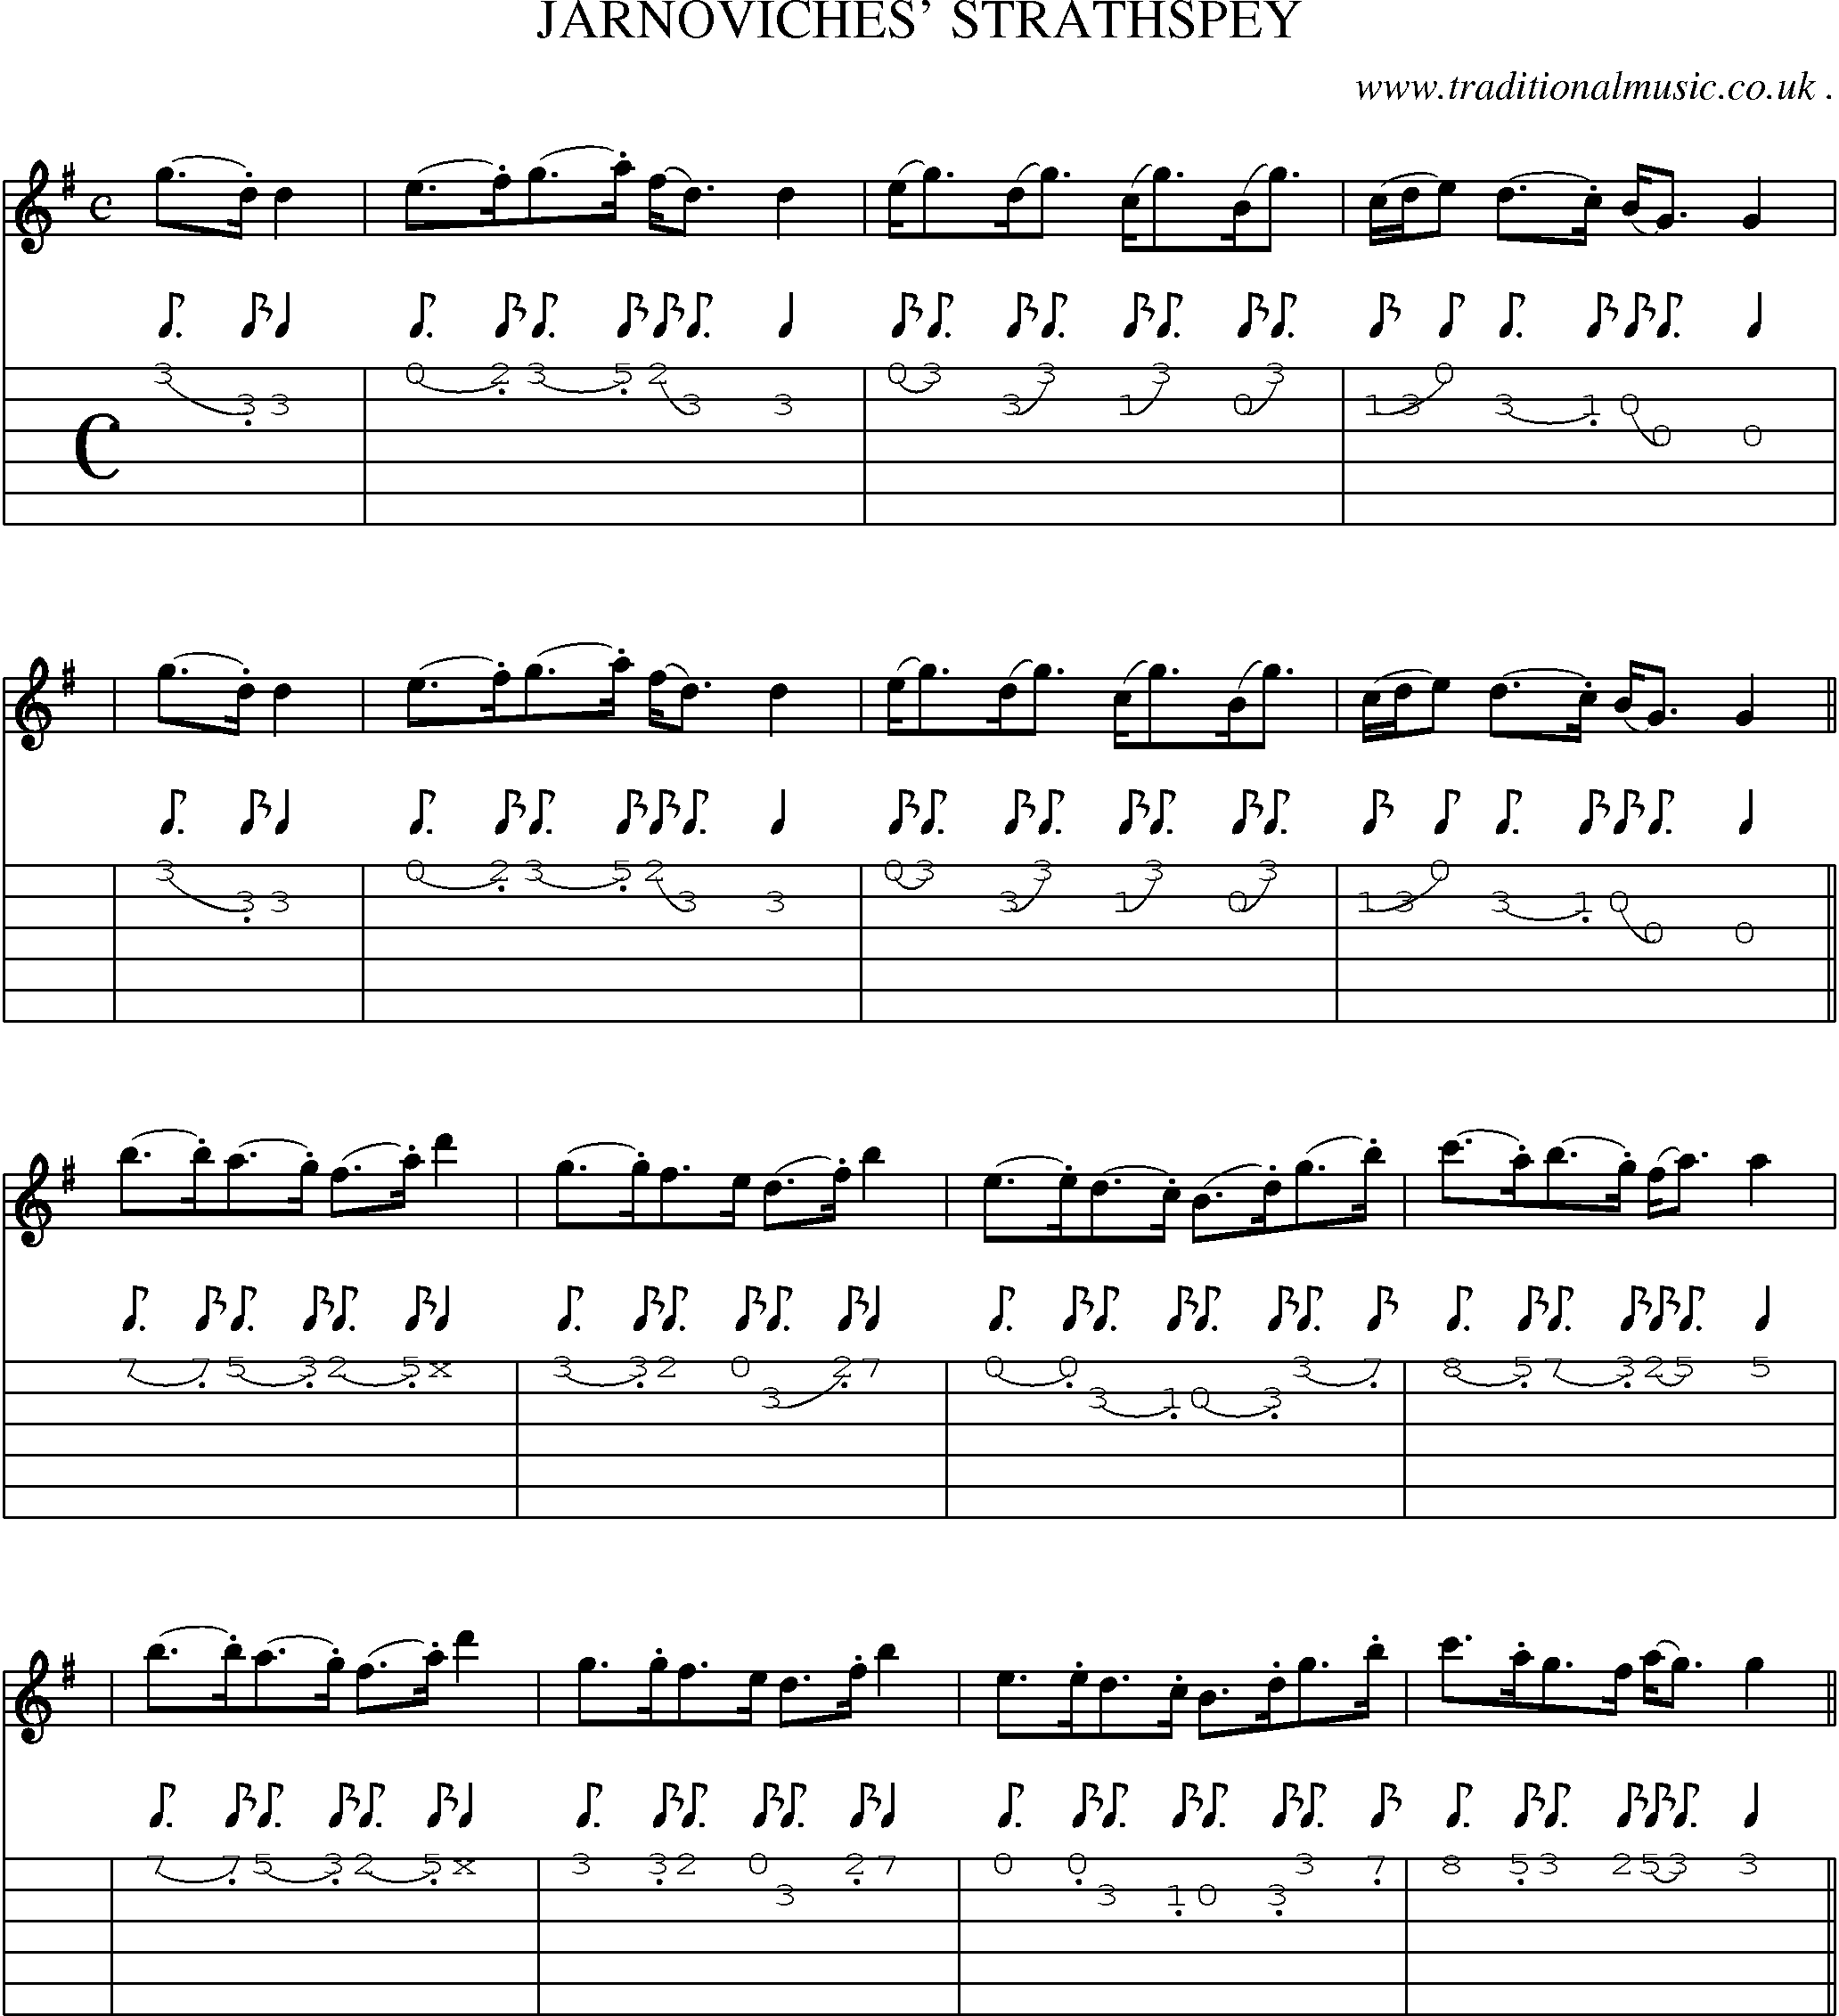 Sheet-Music and Guitar Tabs for Jarnoviches Strathspey